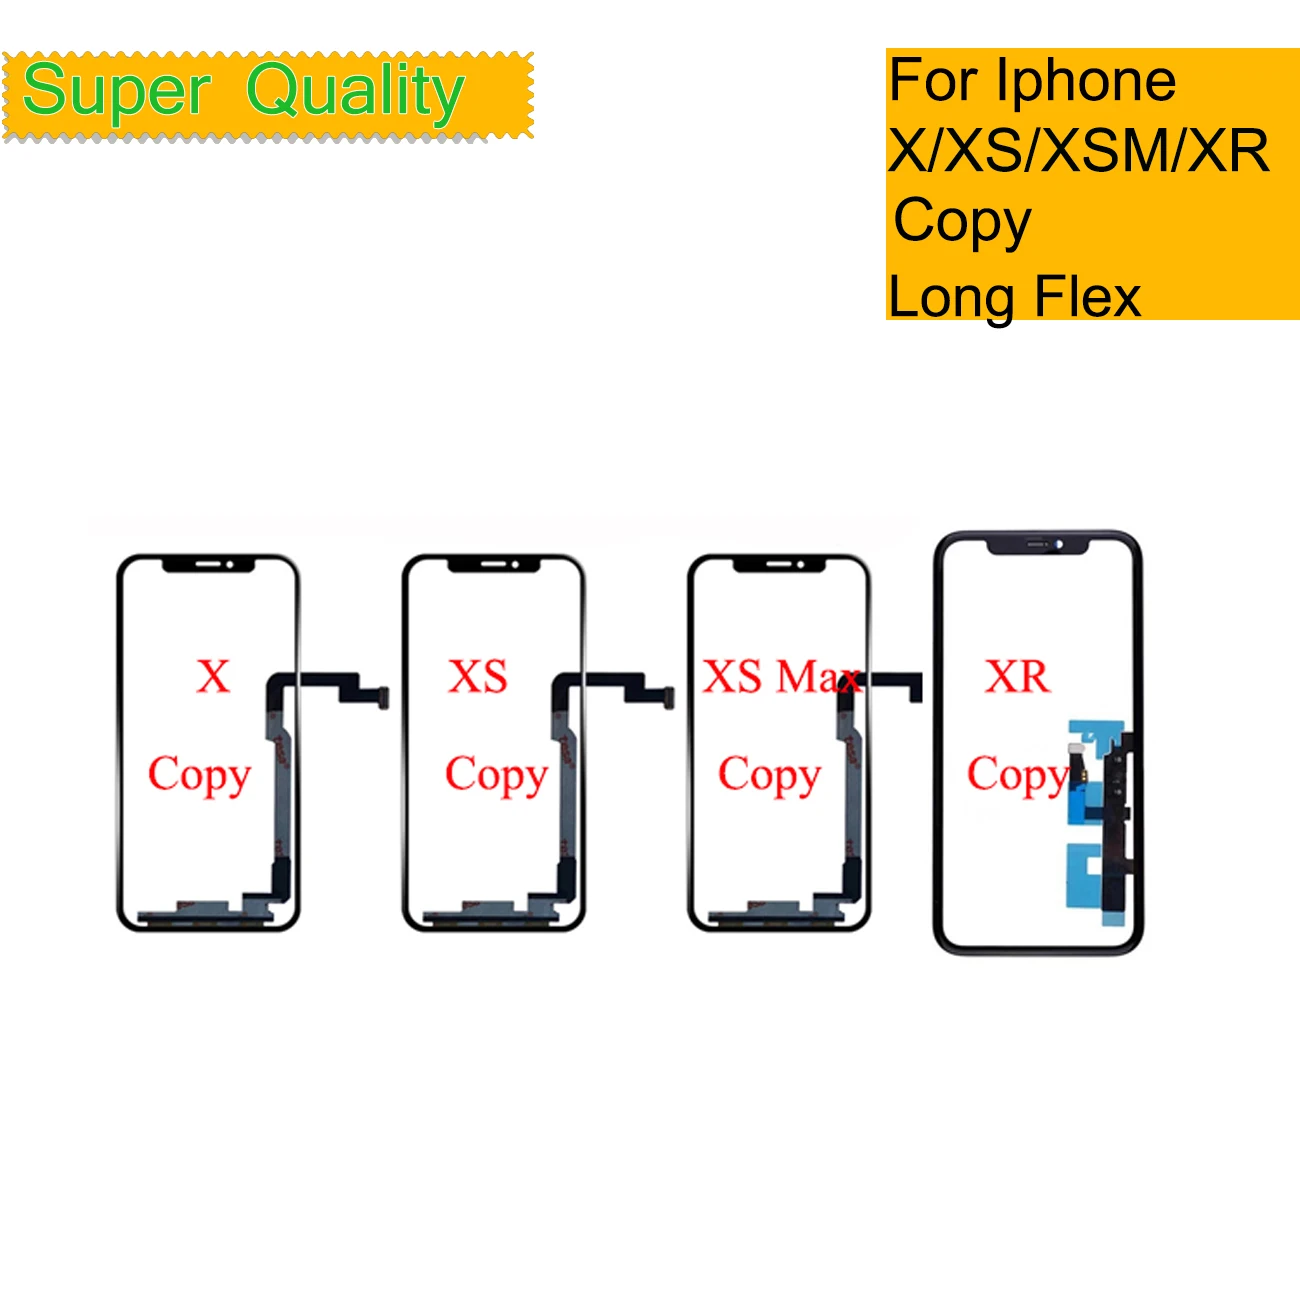 10pcs-lot-for-iphone-x-xr-xs-max-touch-screen-digitizer-panel-sensor-front-glass-lens-long-flex-cable-with-oca-replacement